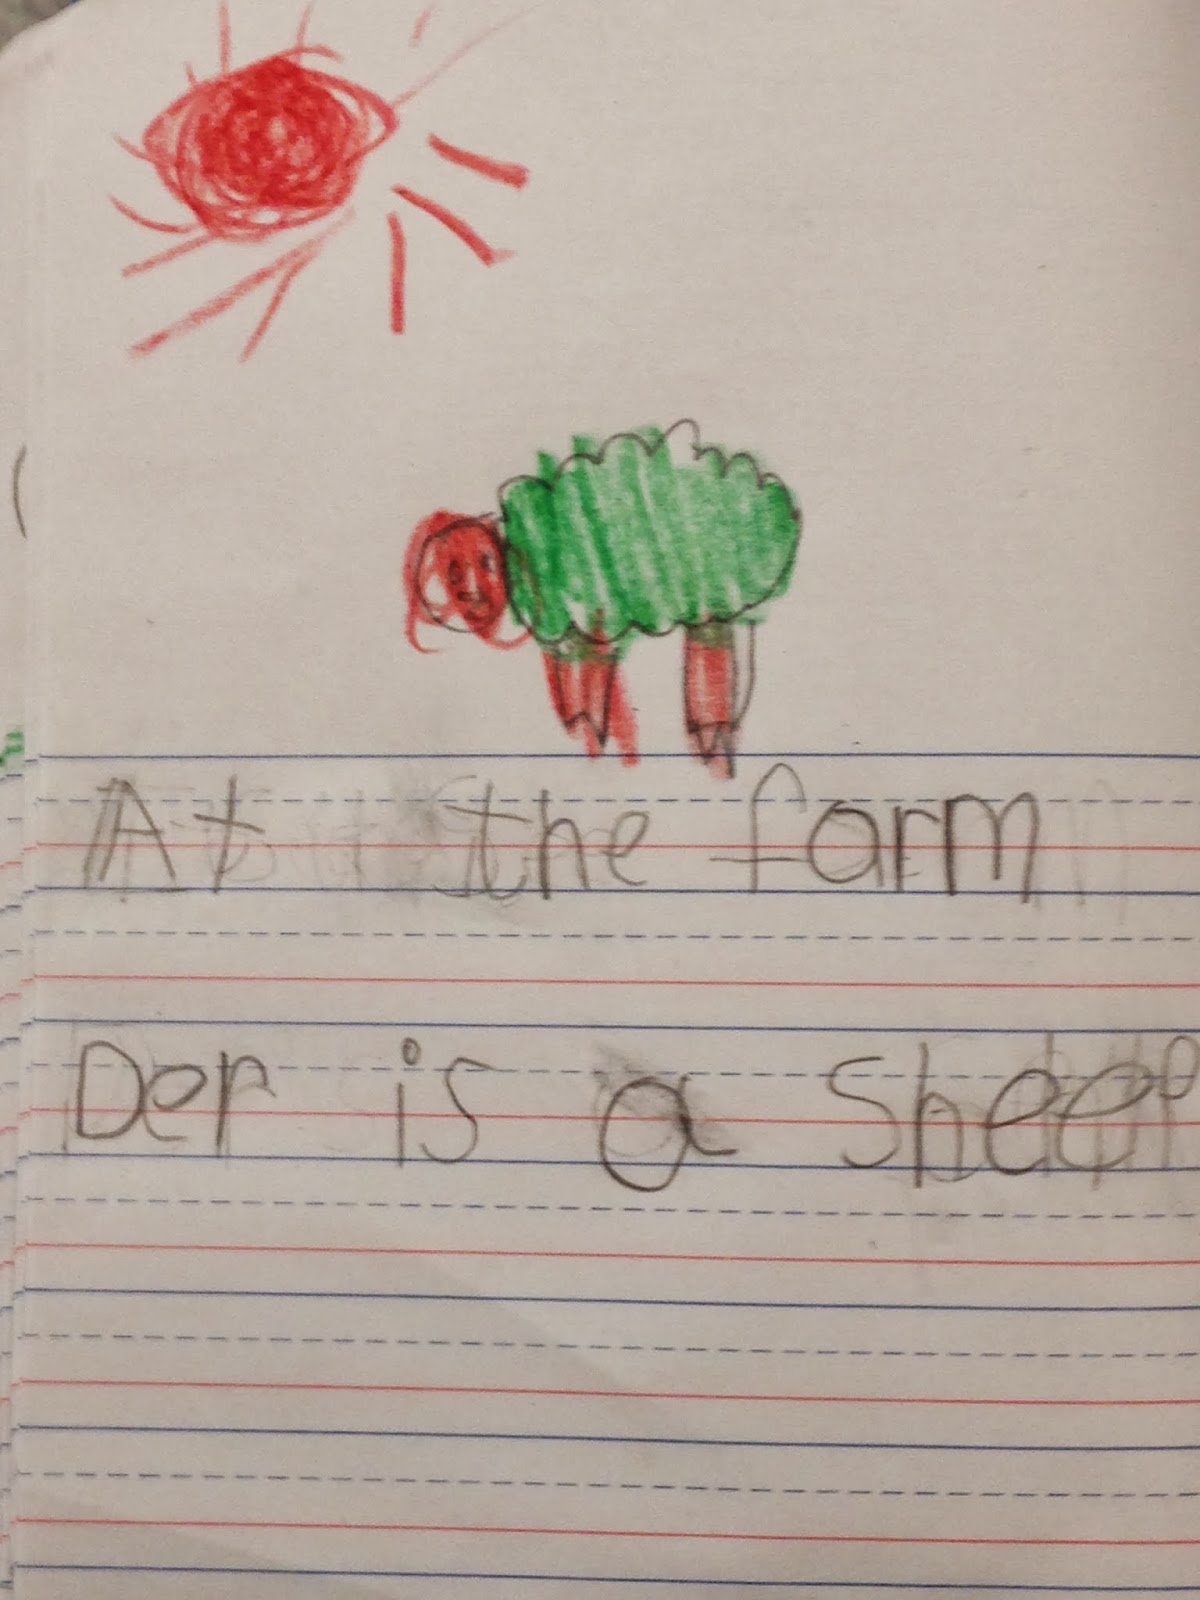 Using thinking maps to support writing in kindergarten